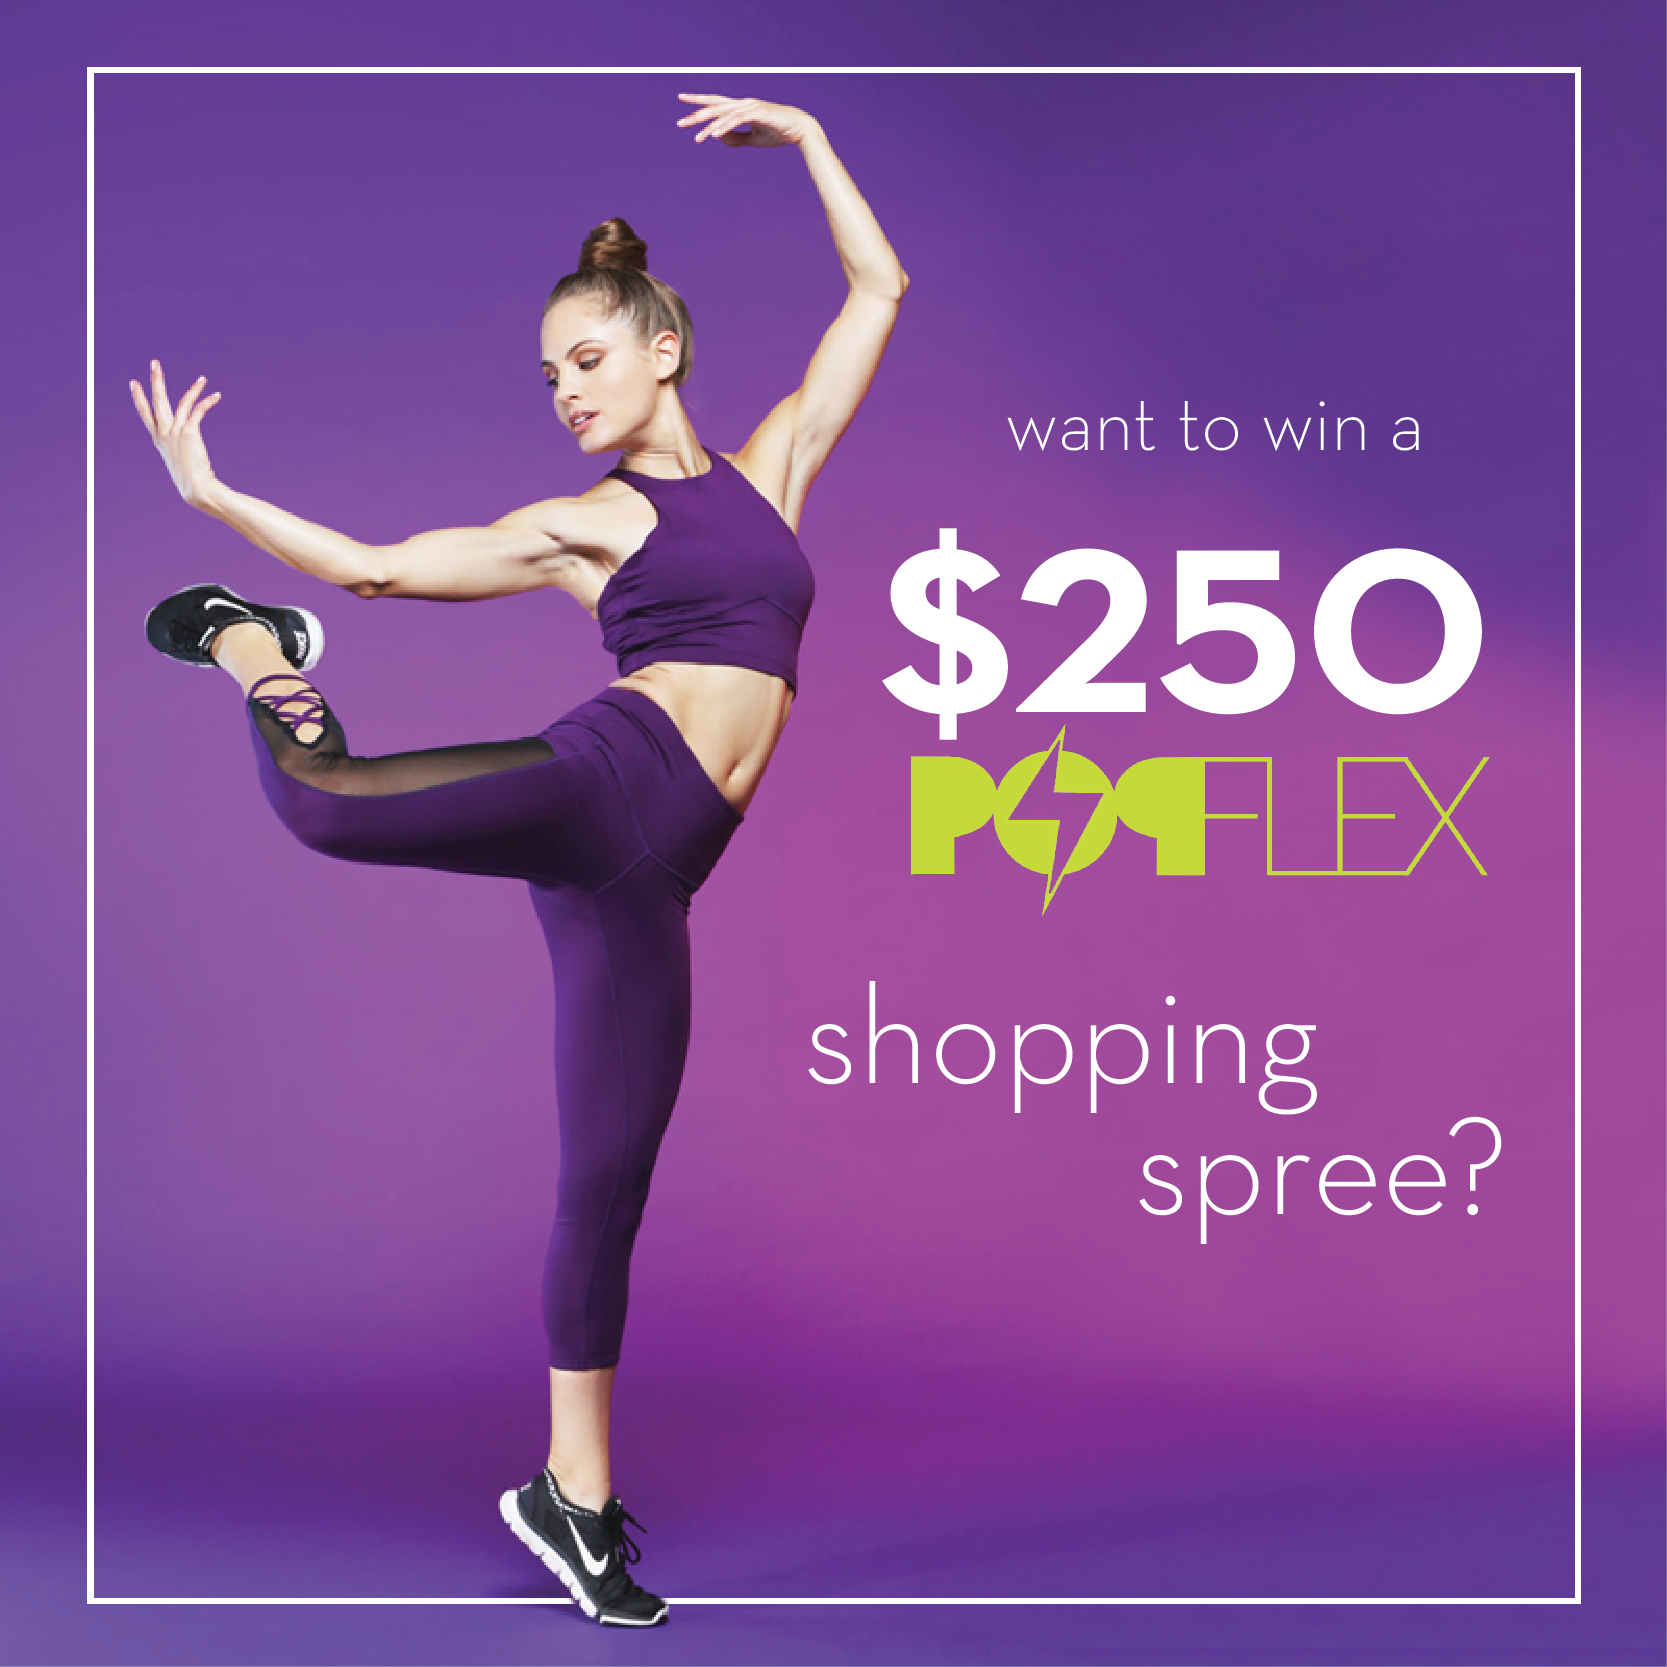 Want to win a $250 Shopping Spree!?